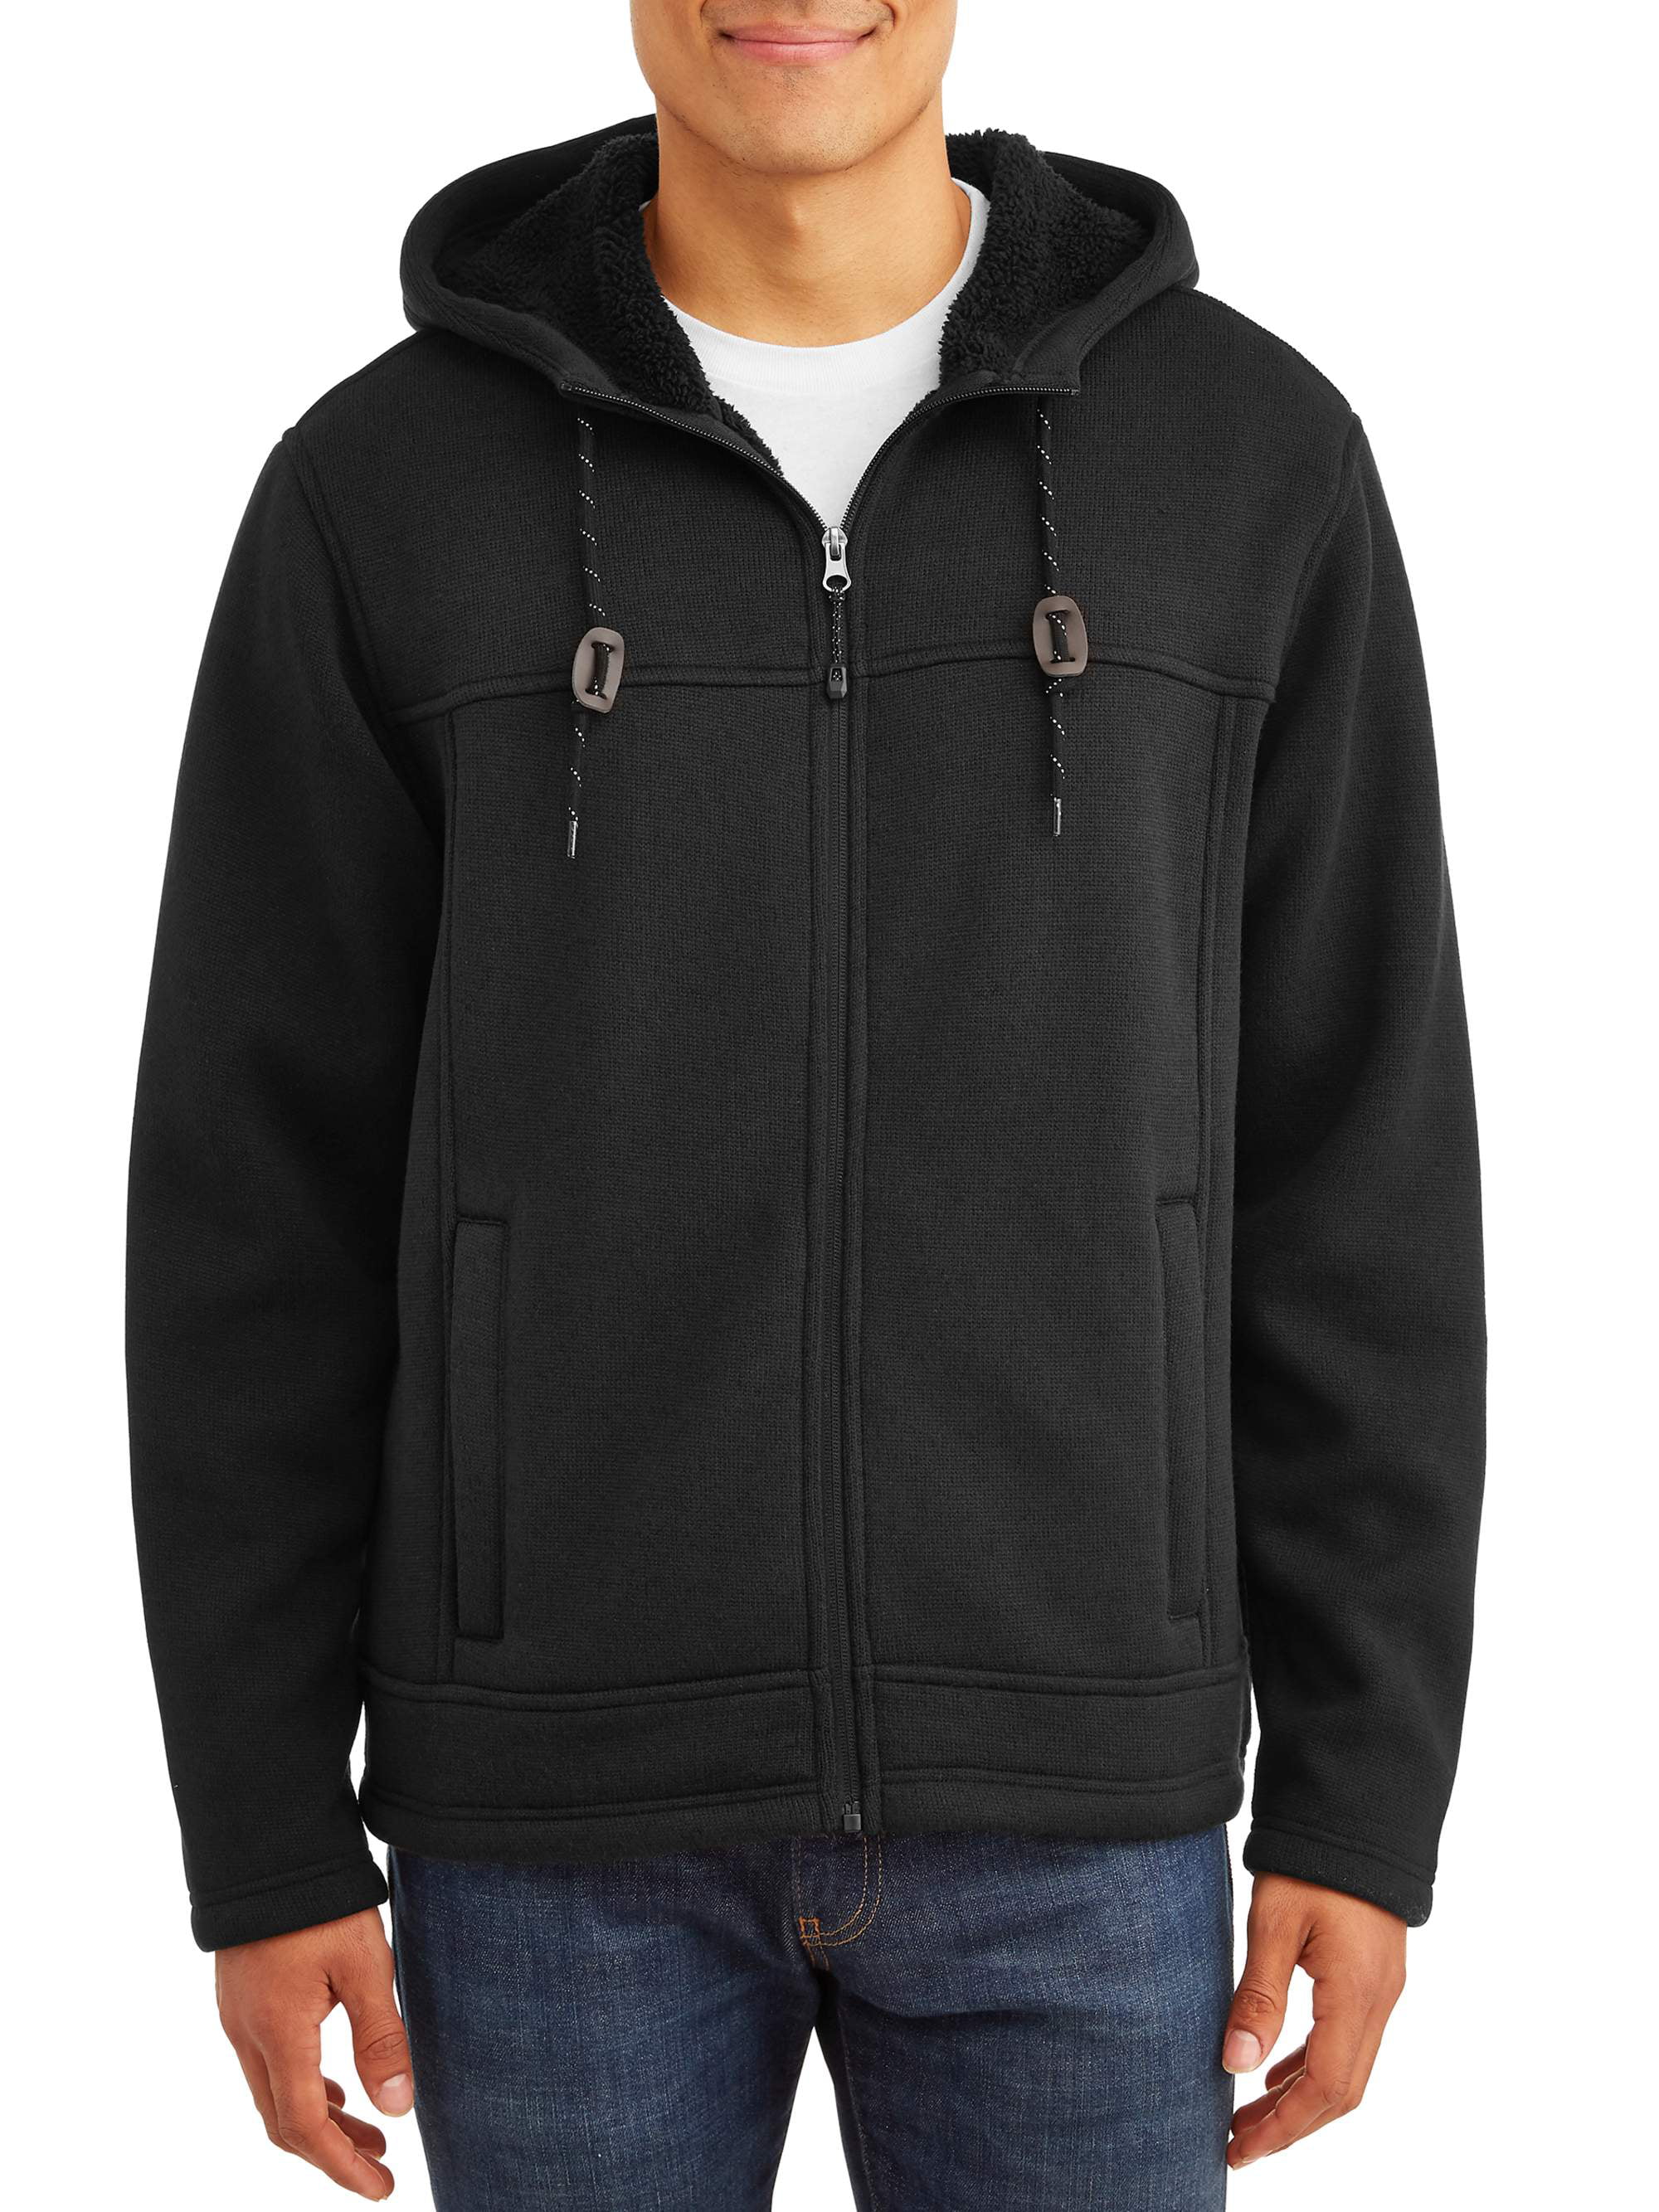 Sherpa Men's Tembo Full Zip Sweater Various Sizes and Colors 